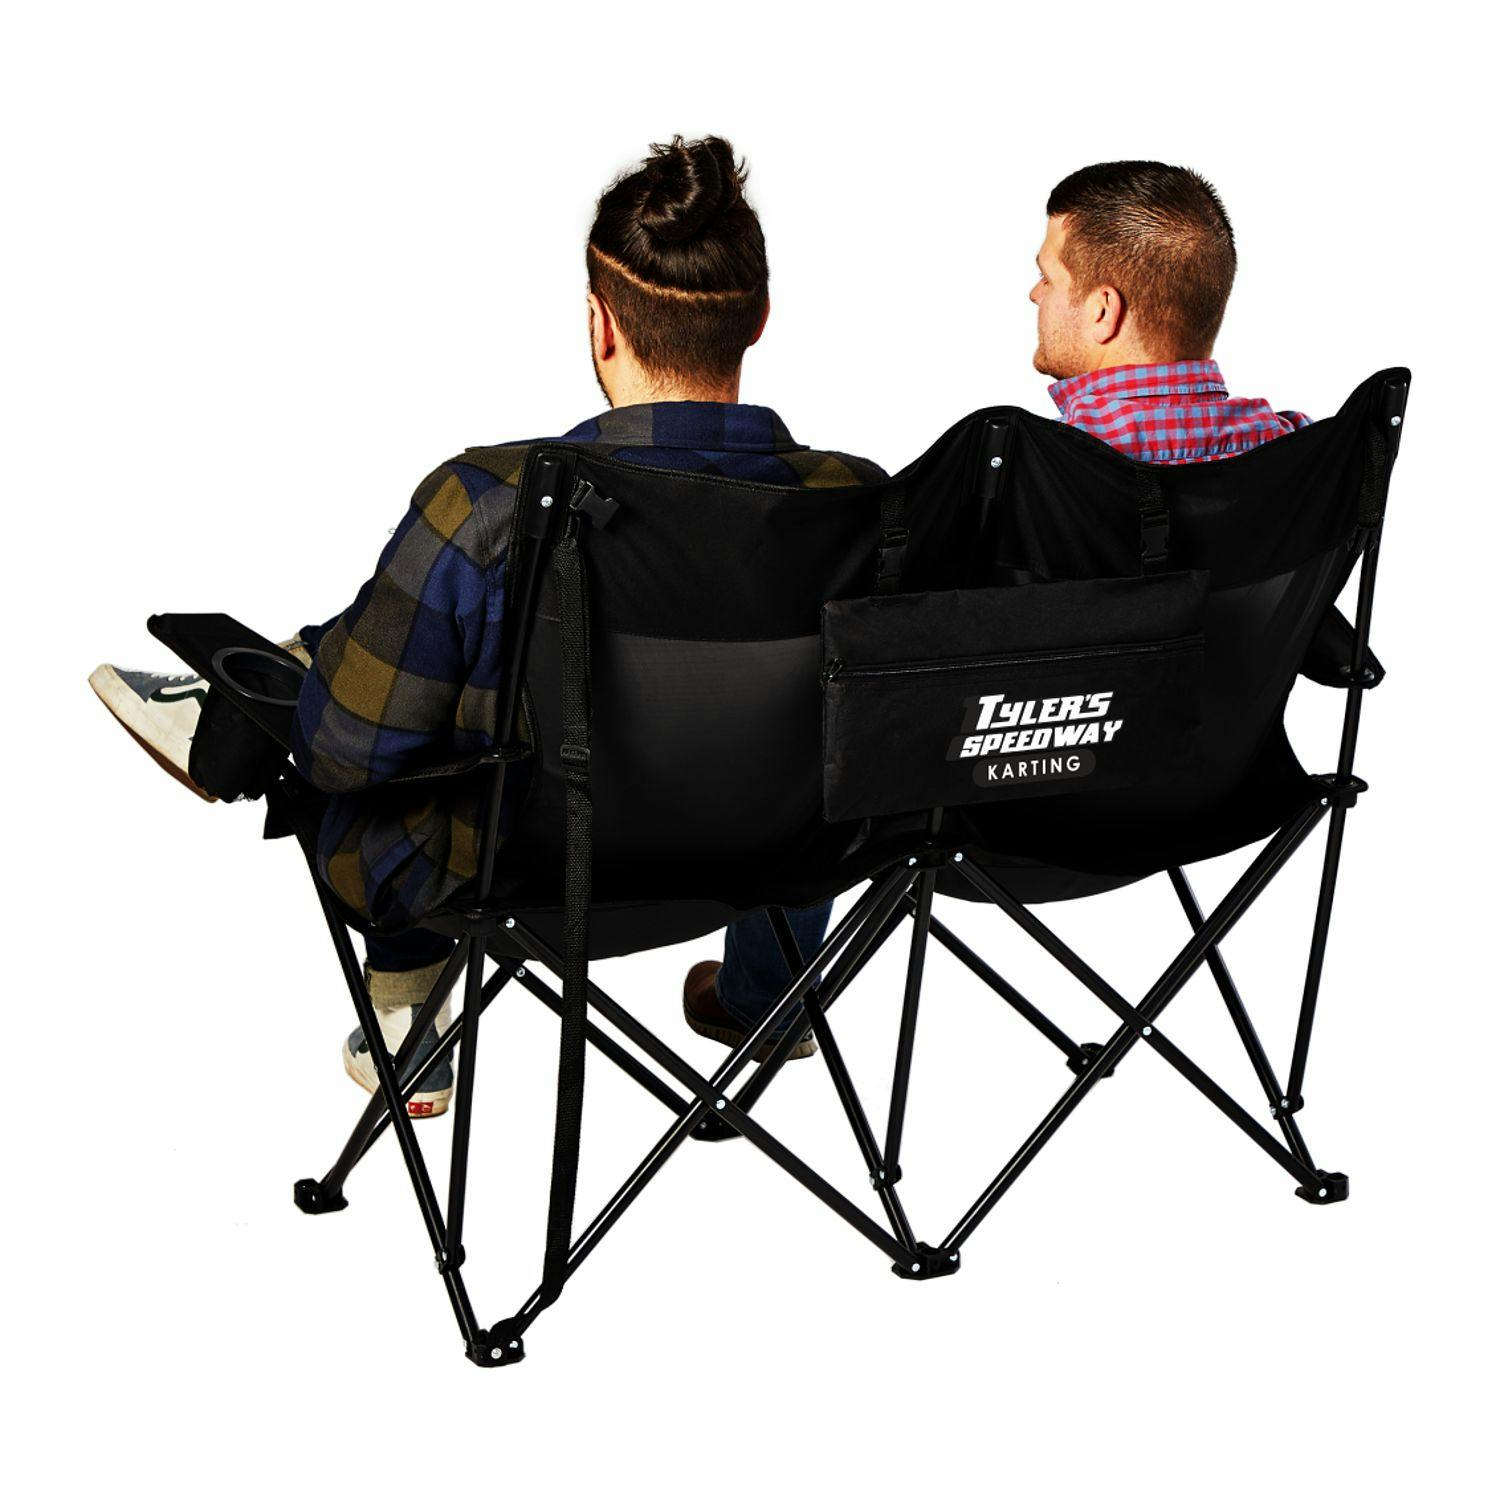 Double Seater Folding Chair - additional Image 5